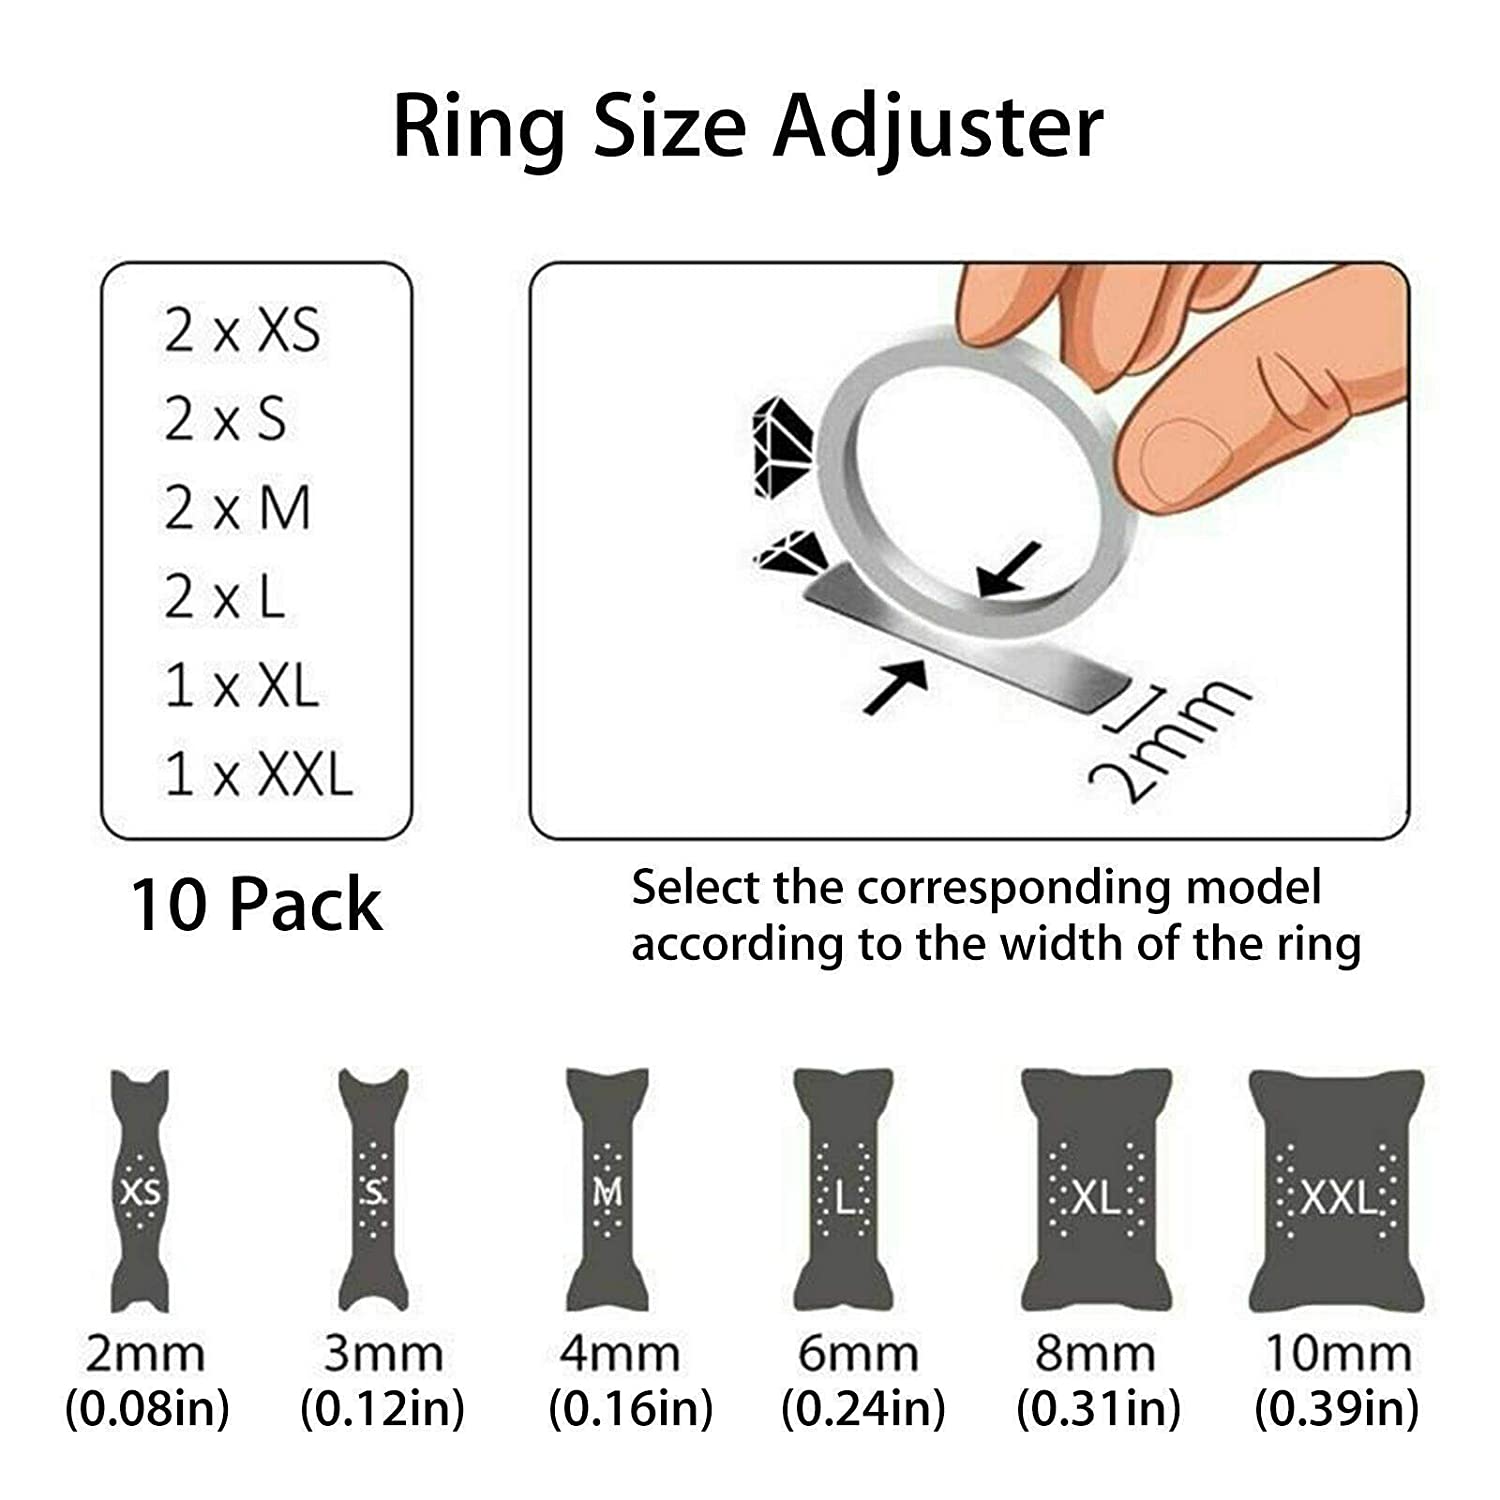 Sozzumi Ring Adjuster for loose rings, Invisible Ring Tightener for Women. (Silicone)